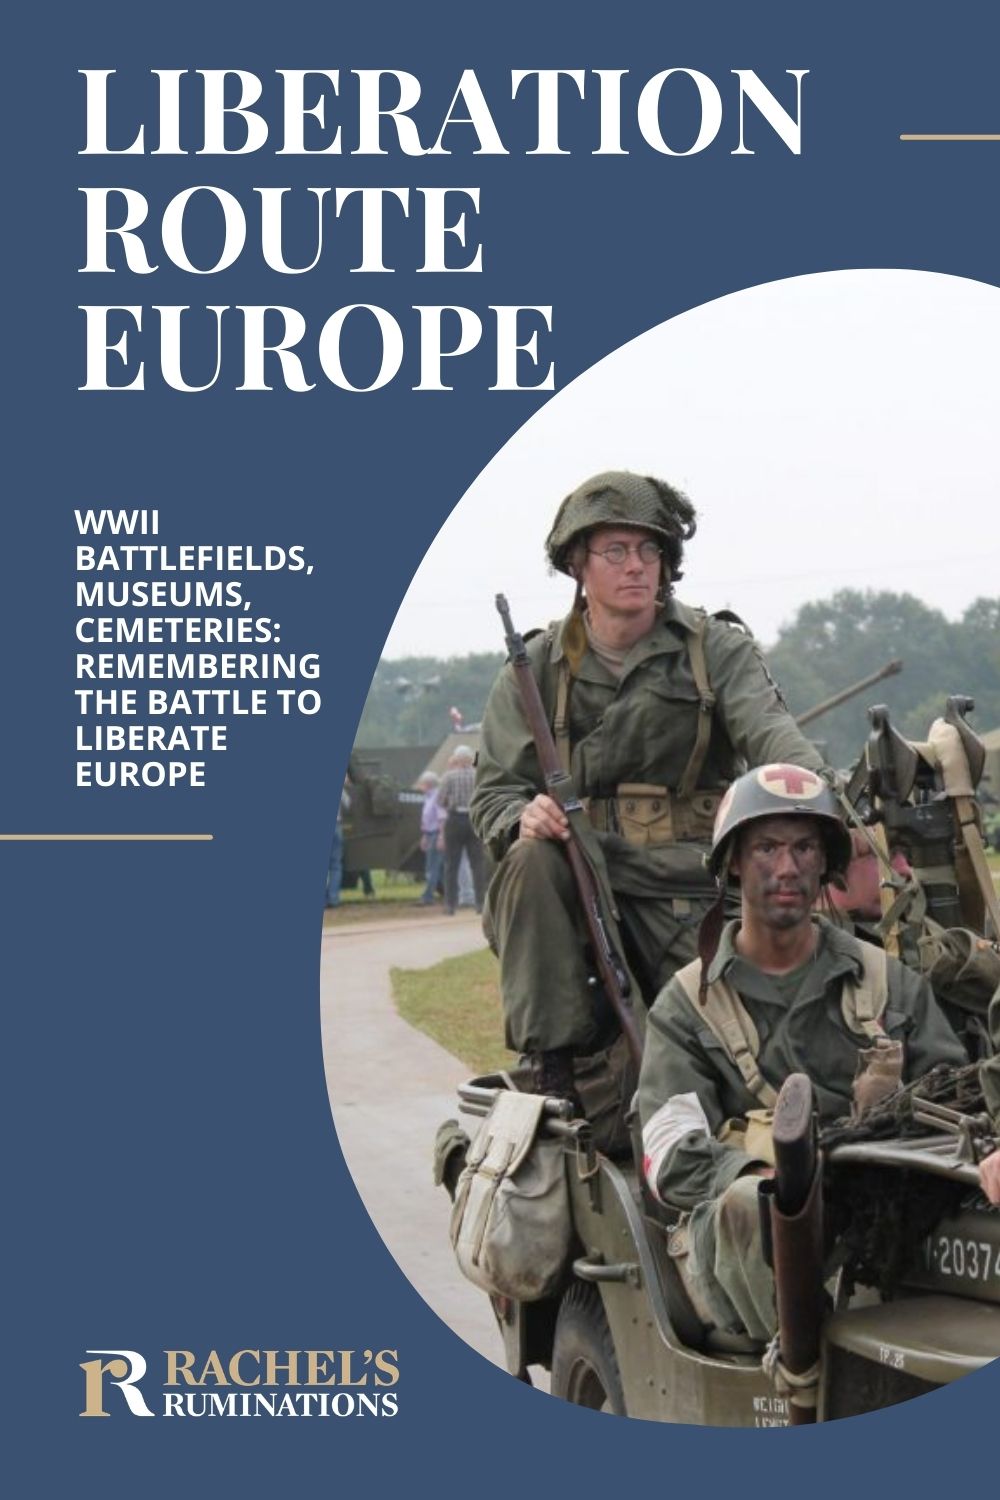 The Liberation Route Europe, its WWII battlefields and museums: it's important to stop and acknowledge the world-changing events of WWII. via @rachelsruminations